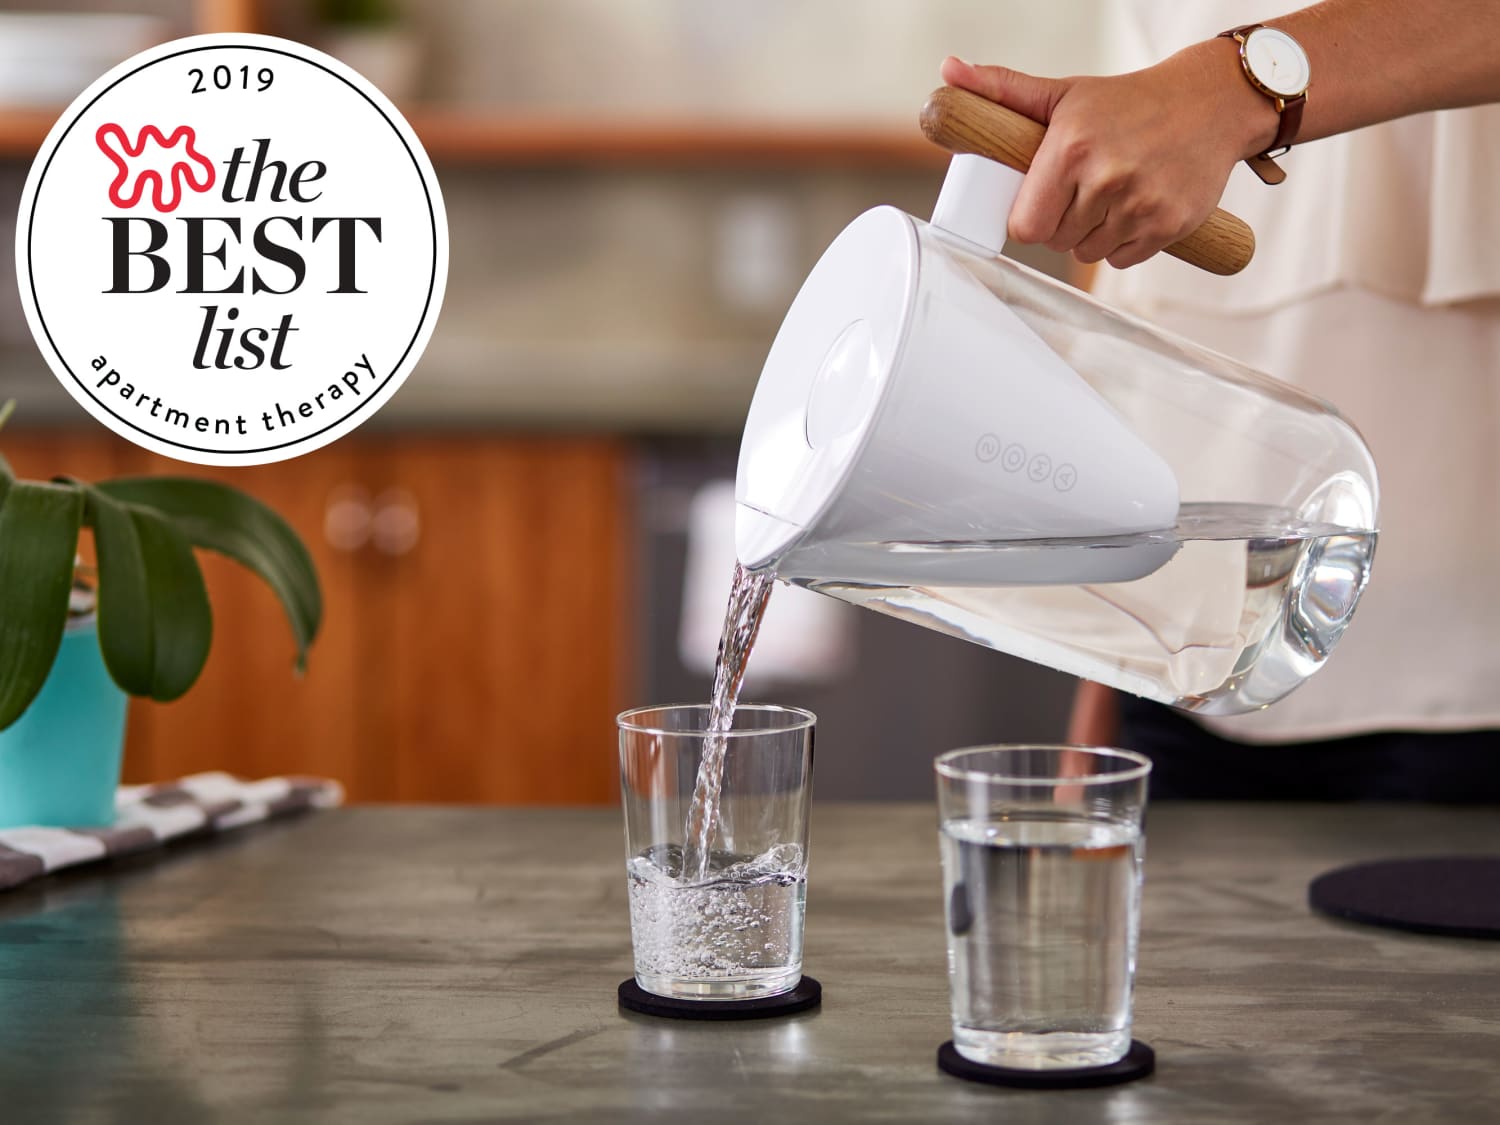 Integral klaver Opera Best Water Filter Pitcher - 2018 Top Rated Reviews | Apartment Therapy